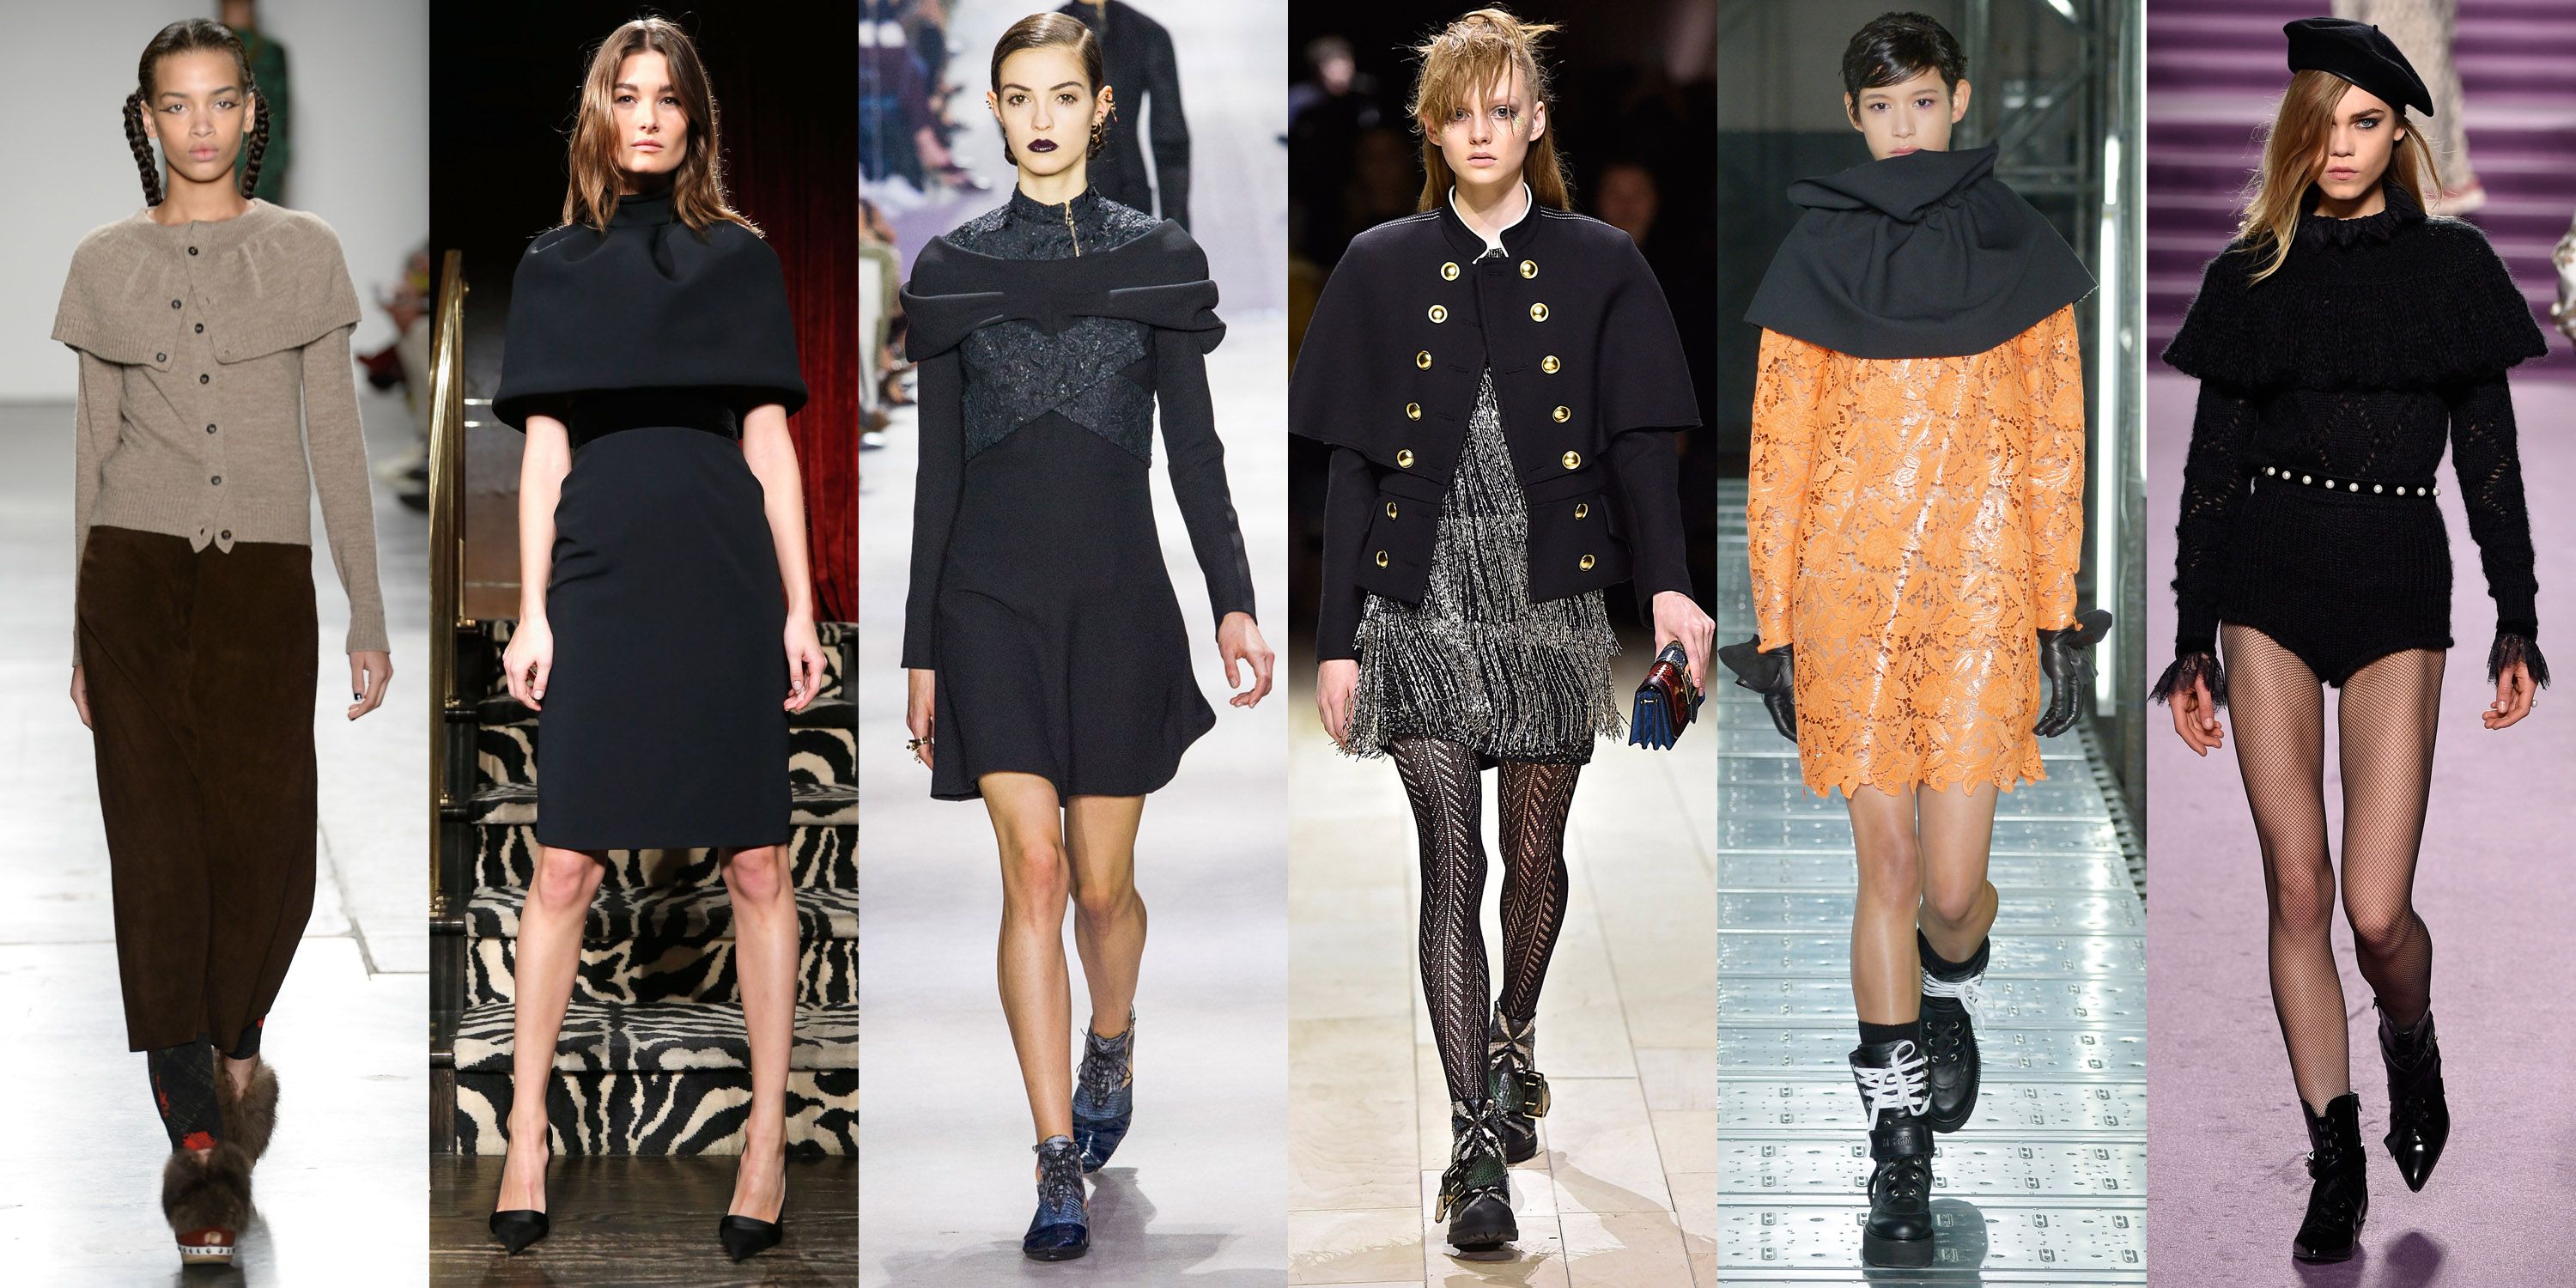 Fall 2016 Fashion - Comprehensive Guide to New Fall Trends